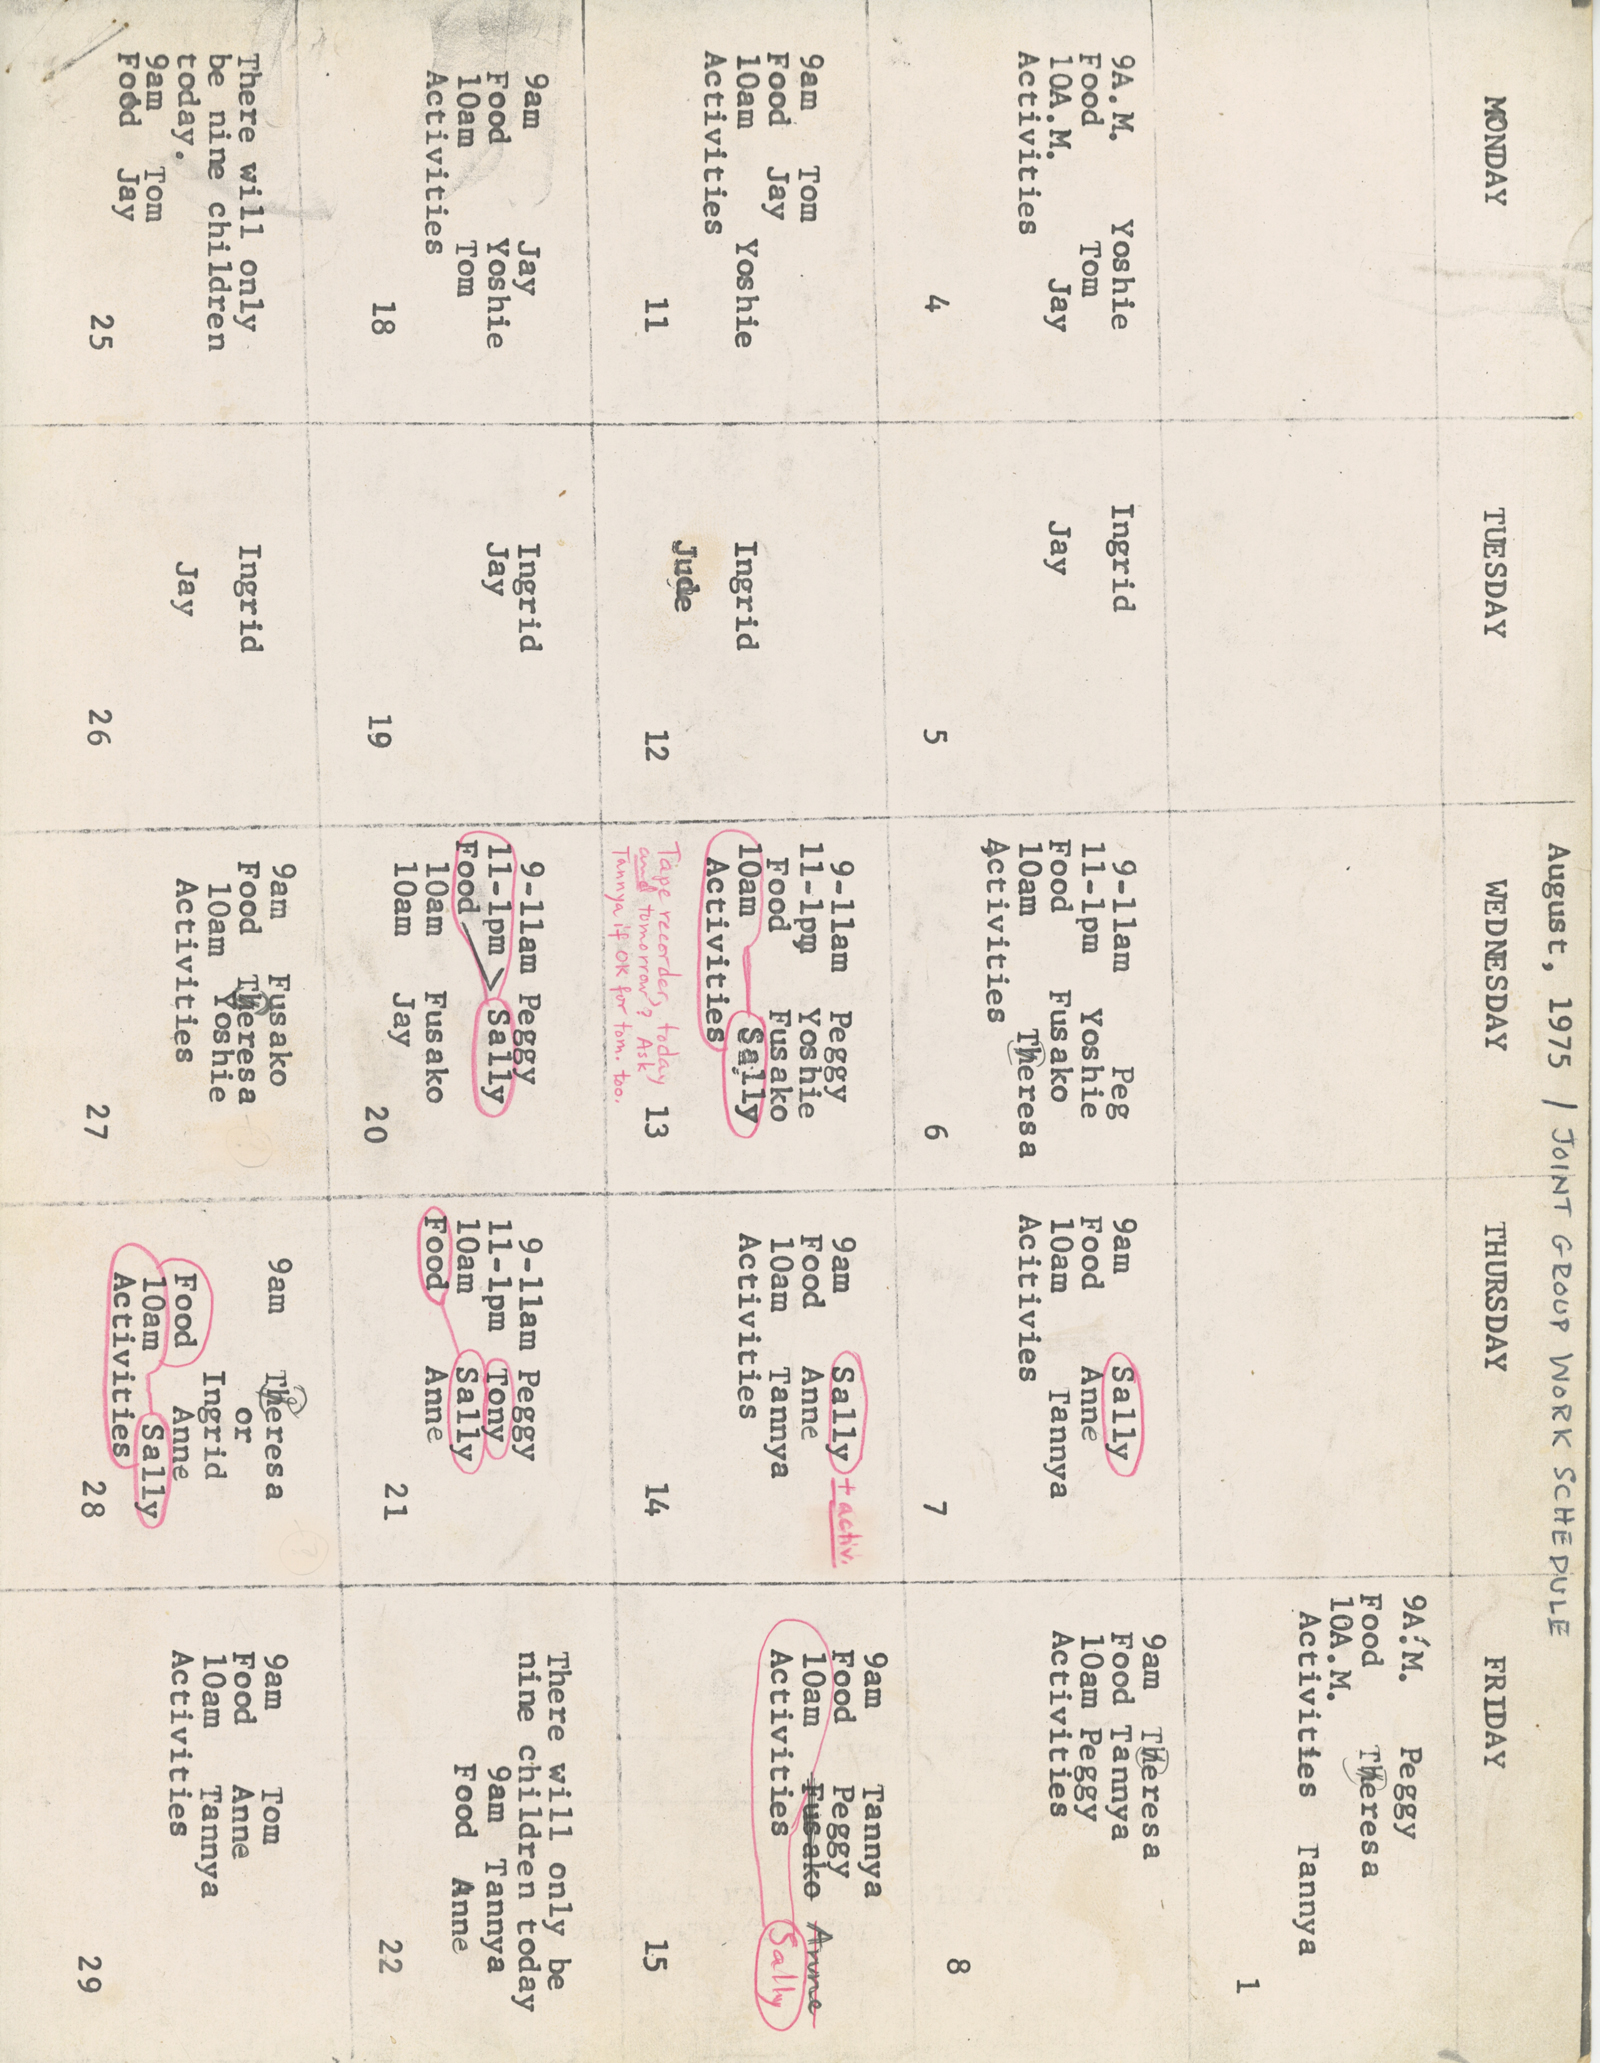 SoHo Playgroup Schedule (1975)